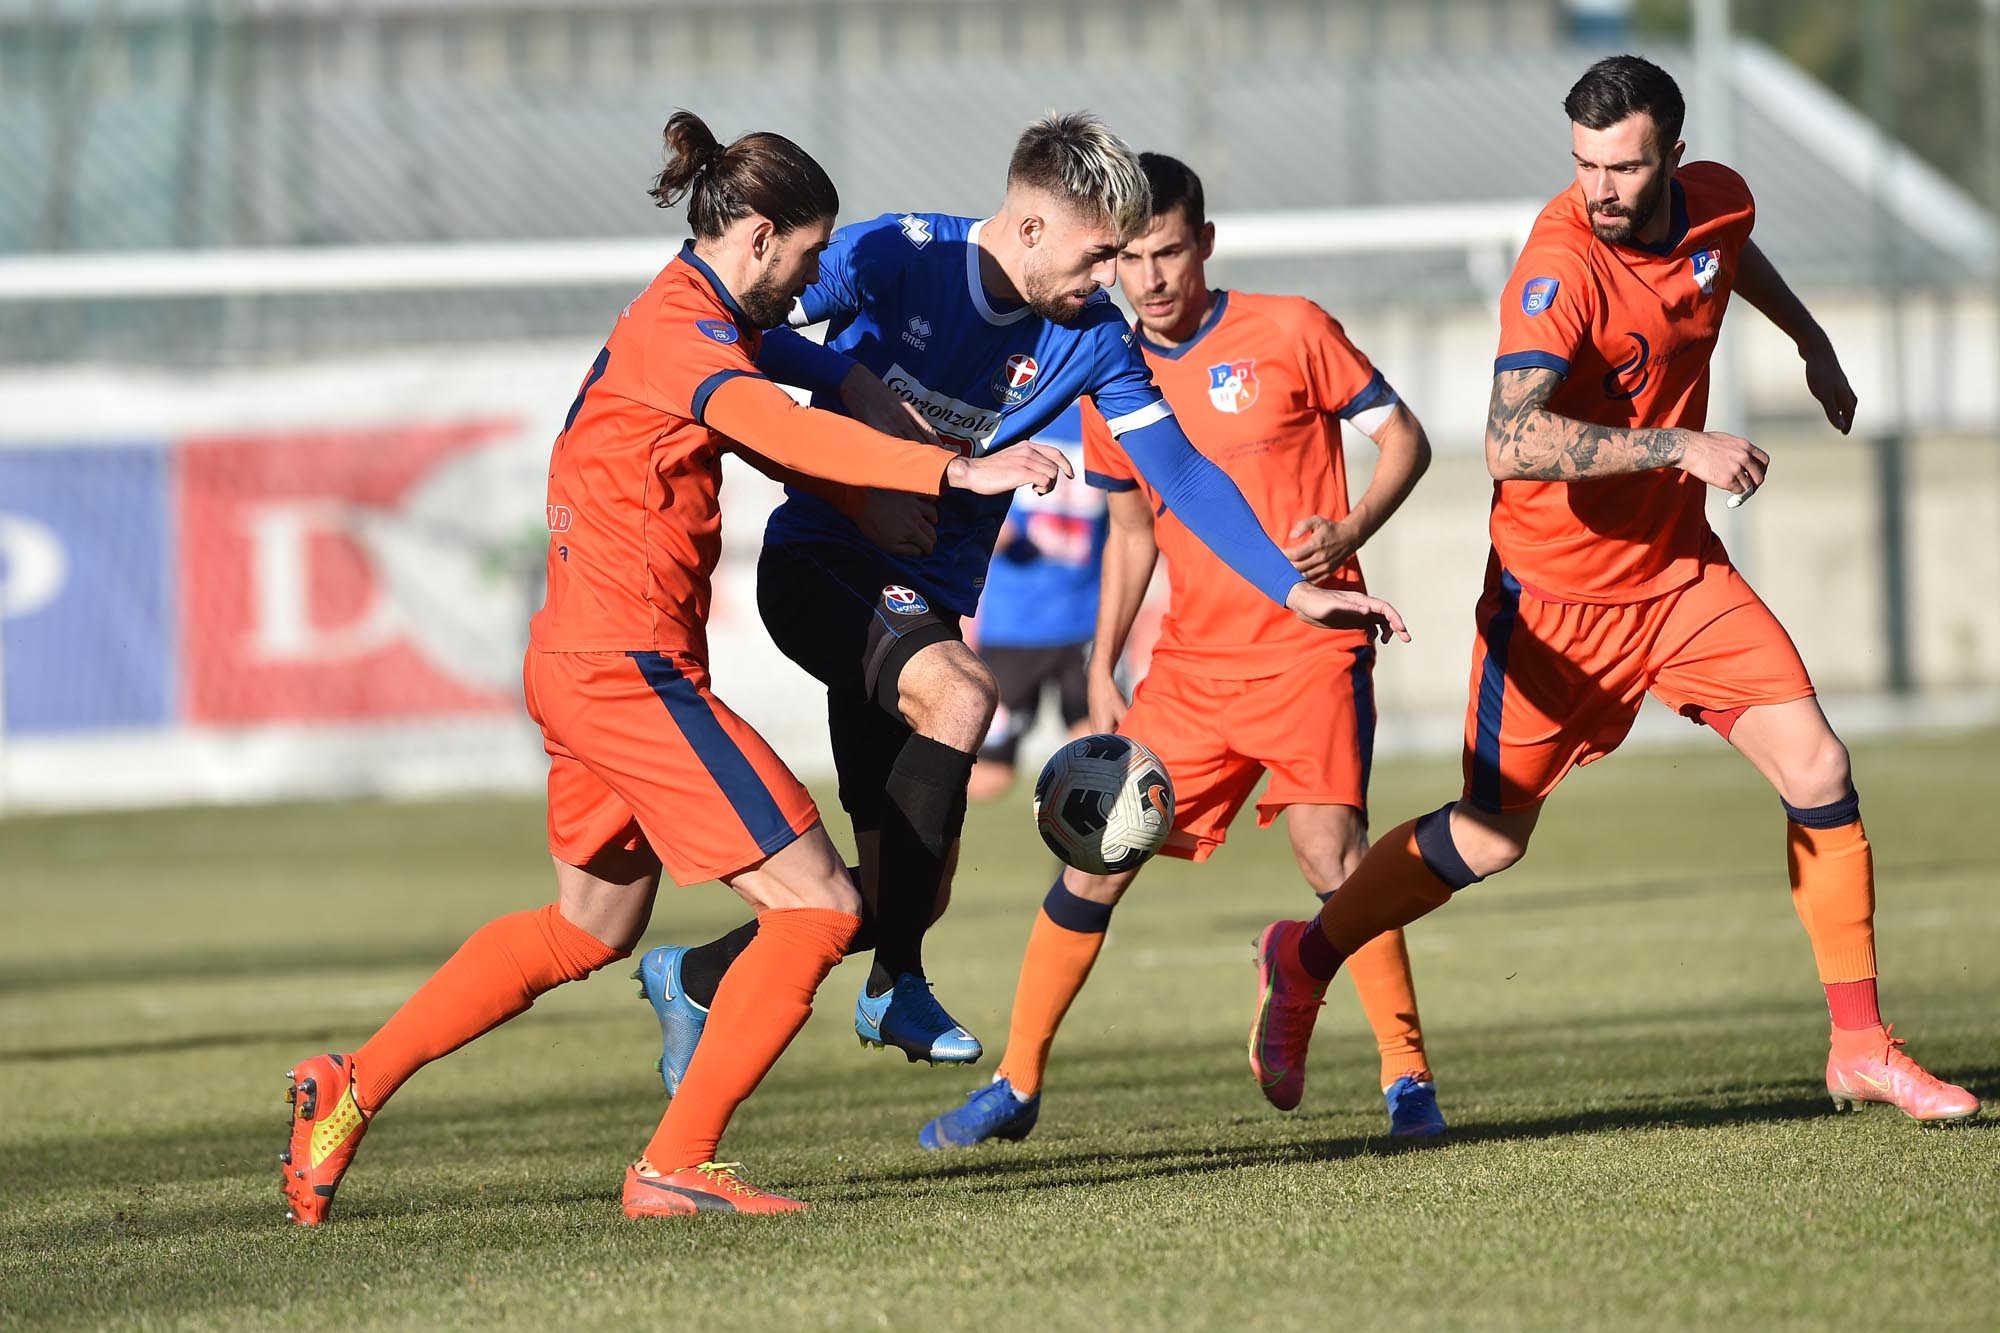 Read more about the article PDHAE-Novara 2-2 | Tabellino del match